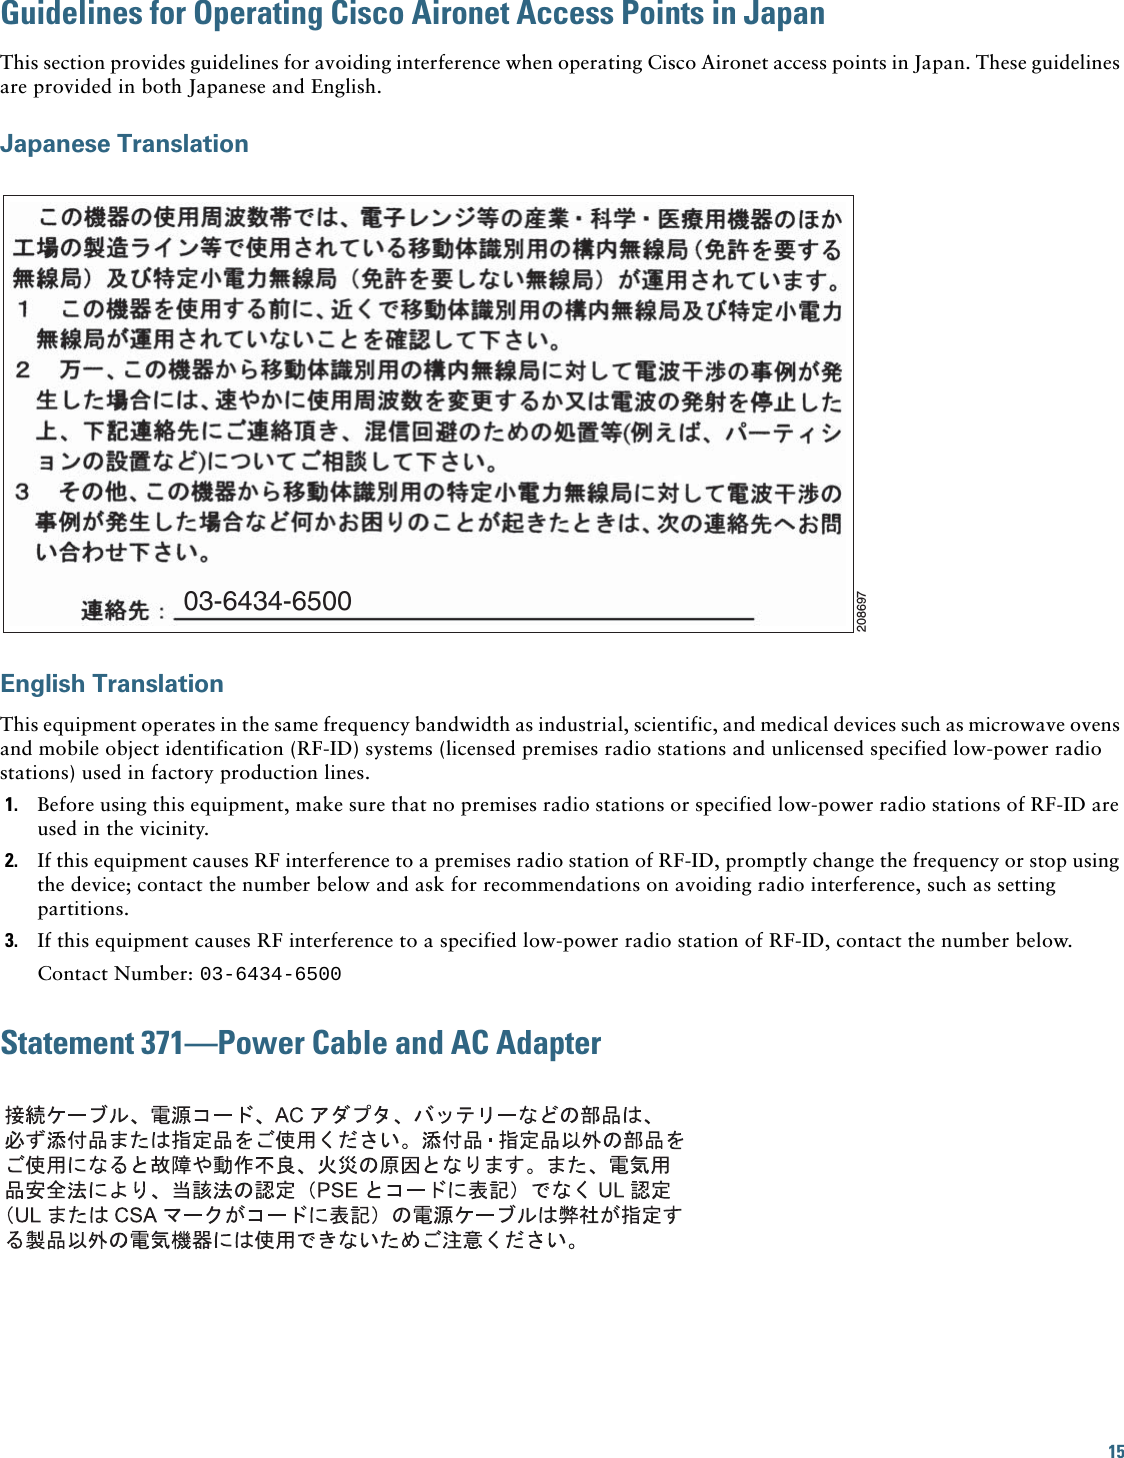 15 Guidelines for Operating Cisco Aironet Access Points in JapanThis section provides guidelines for avoiding interference when operating Cisco Aironet access points in Japan. These guidelines are provided in both Japanese and English.Japanese TranslationEnglish TranslationThis equipment operates in the same frequency bandwidth as industrial, scientific, and medical devices such as microwave ovens and mobile object identification (RF-ID) systems (licensed premises radio stations and unlicensed specified low-power radio stations) used in factory production lines.1. Before using this equipment, make sure that no premises radio stations or specified low-power radio stations of RF-ID are used in the vicinity.2. If this equipment causes RF interference to a premises radio station of RF-ID, promptly change the frequency or stop using the device; contact the number below and ask for recommendations on avoiding radio interference, such as setting partitions.3. If this equipment causes RF interference to a specified low-power radio station of RF-ID, contact the number below.Contact Number: 03-6434-6500Statement 371—Power Cable and AC Adapter03-6434-6500208697